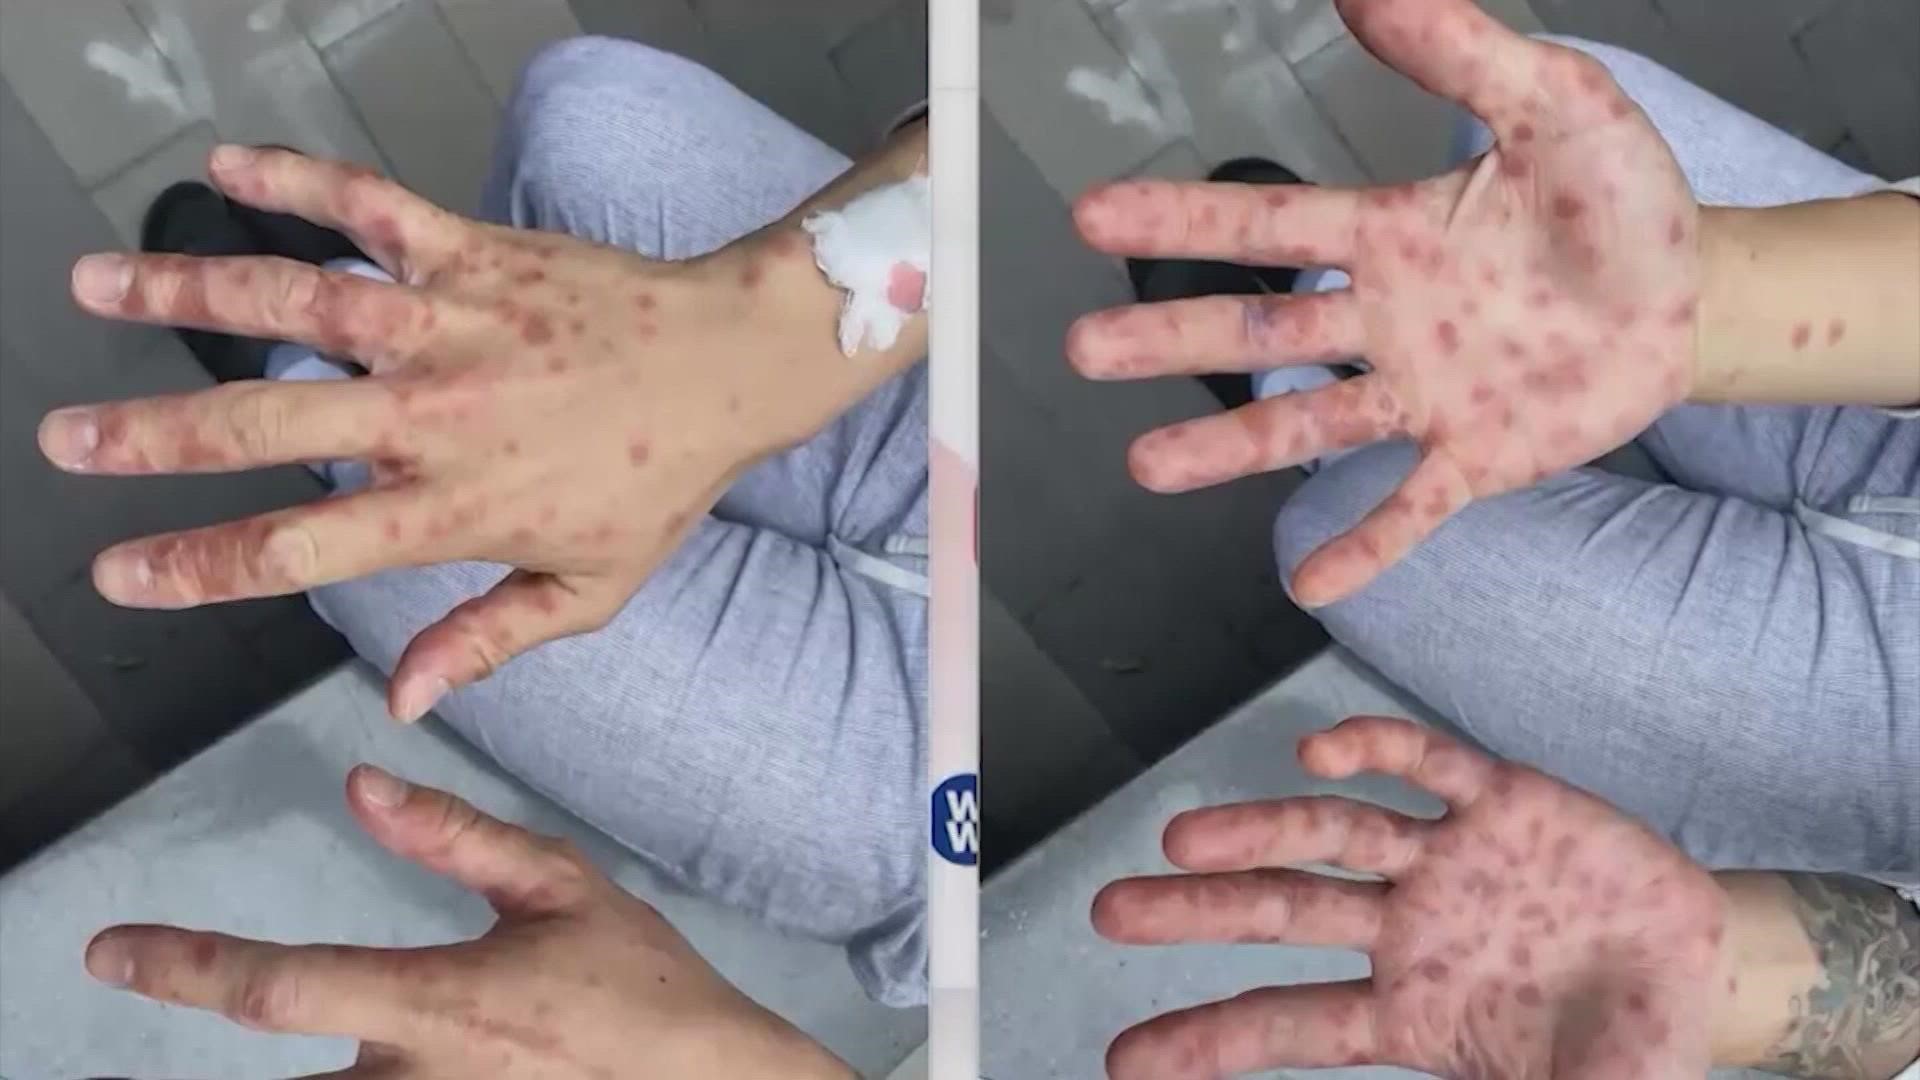 The CDC said it is doing a phased approach to the monkeypox vaccine allocation. It expects 1.9 million doses available through the rest of the year.